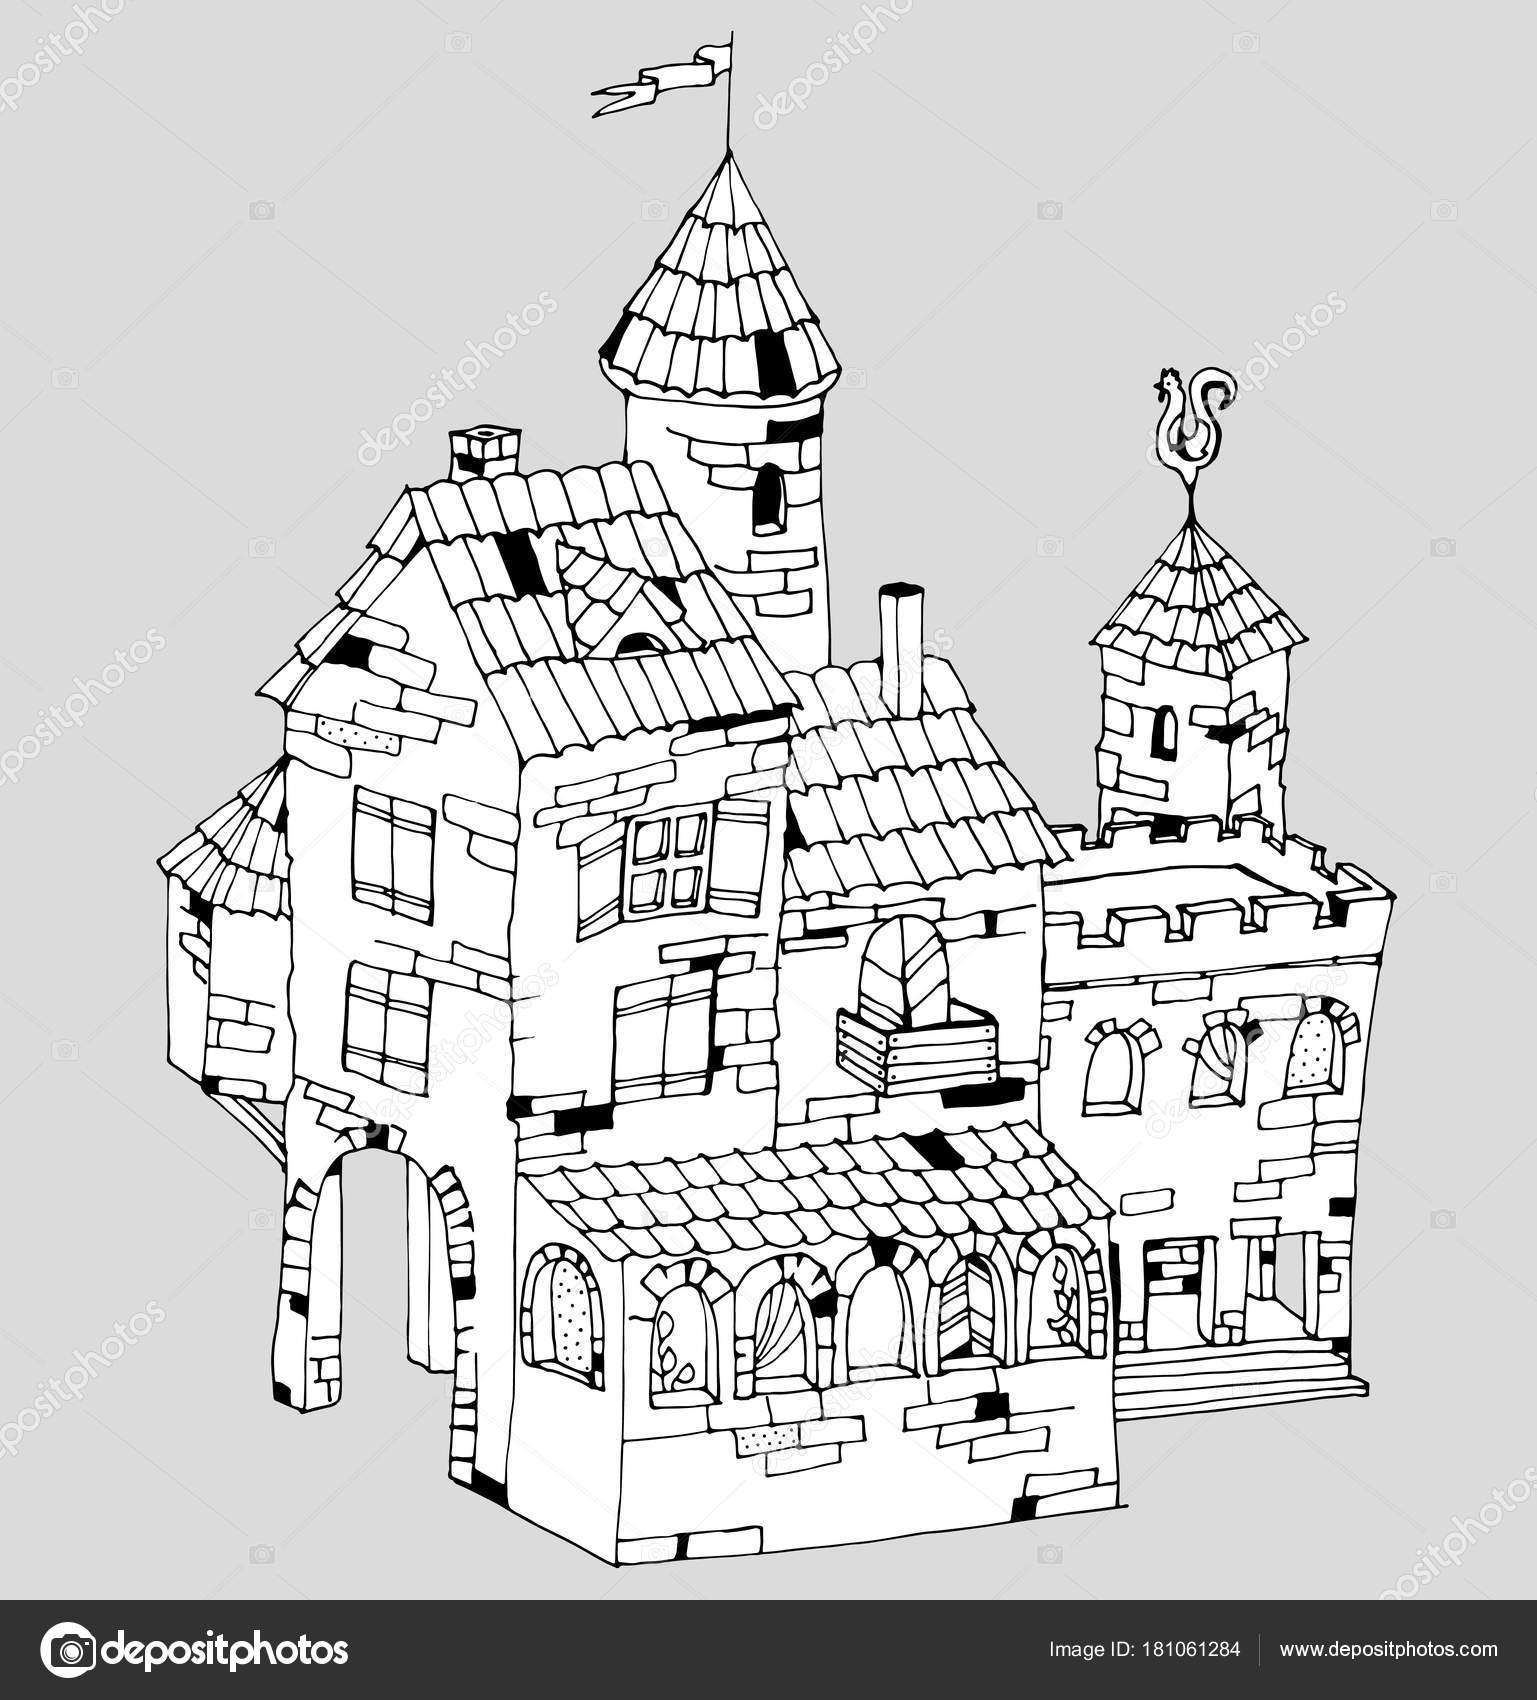 Mansion Coloring Pages Fairy Tale Ancient Brick House Or Mansion Graphic Vector